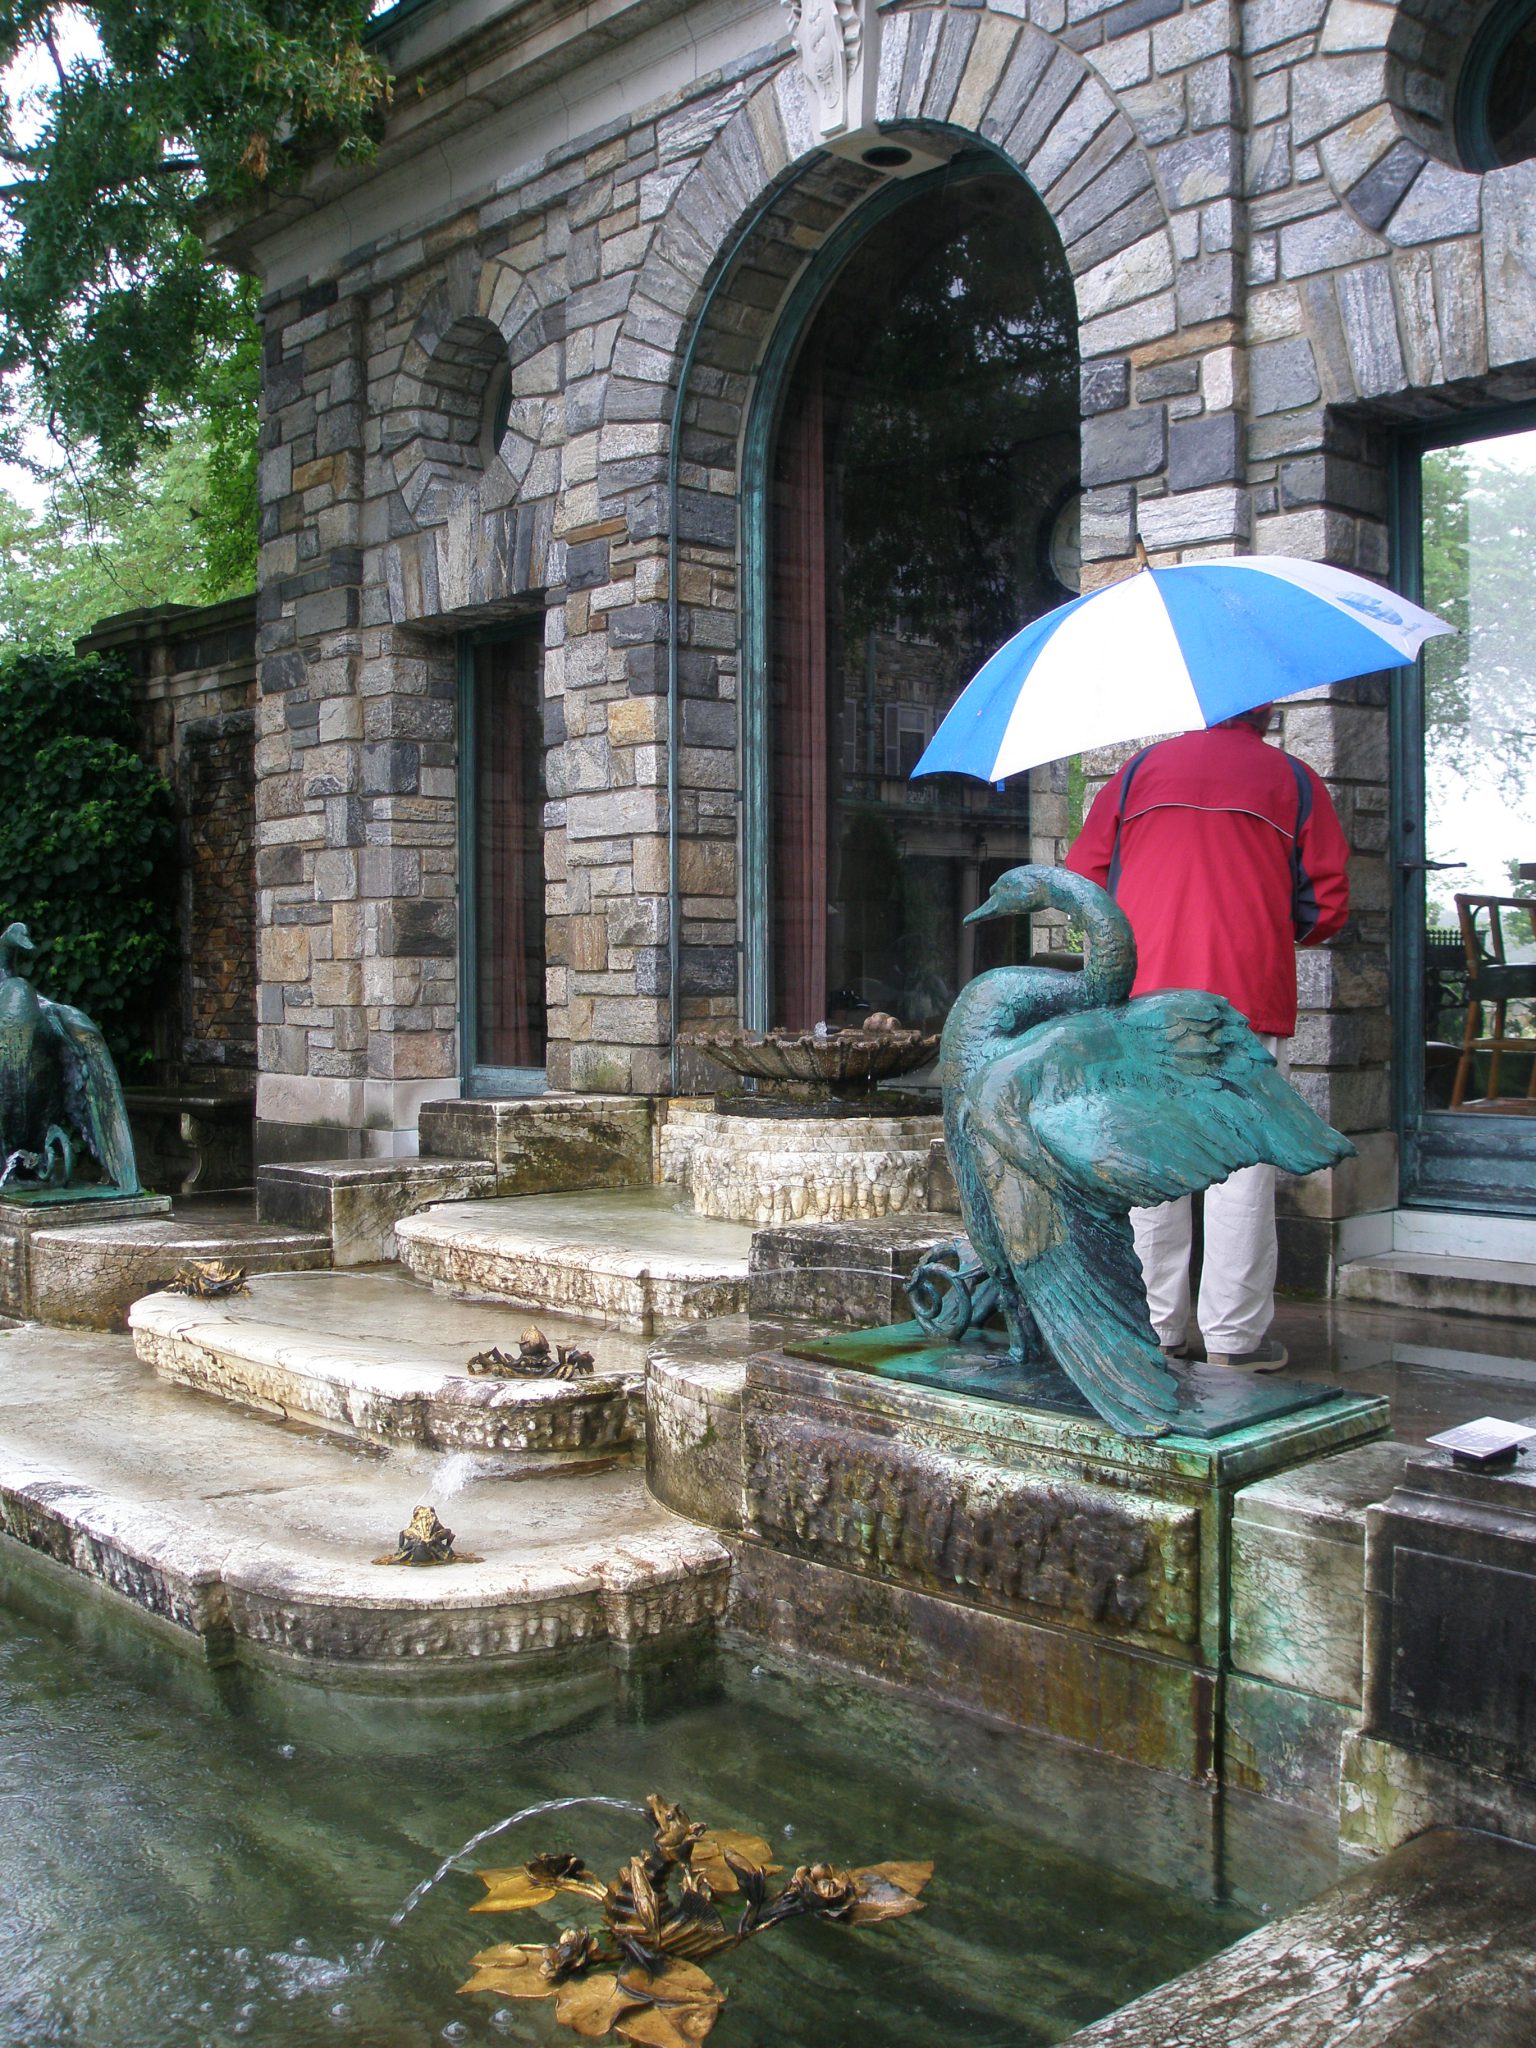 At the Tea House, a pool with more fountains by F.M.L.Tonetti. Mr. Onofrio's umbrella is keeping him only partially dry.